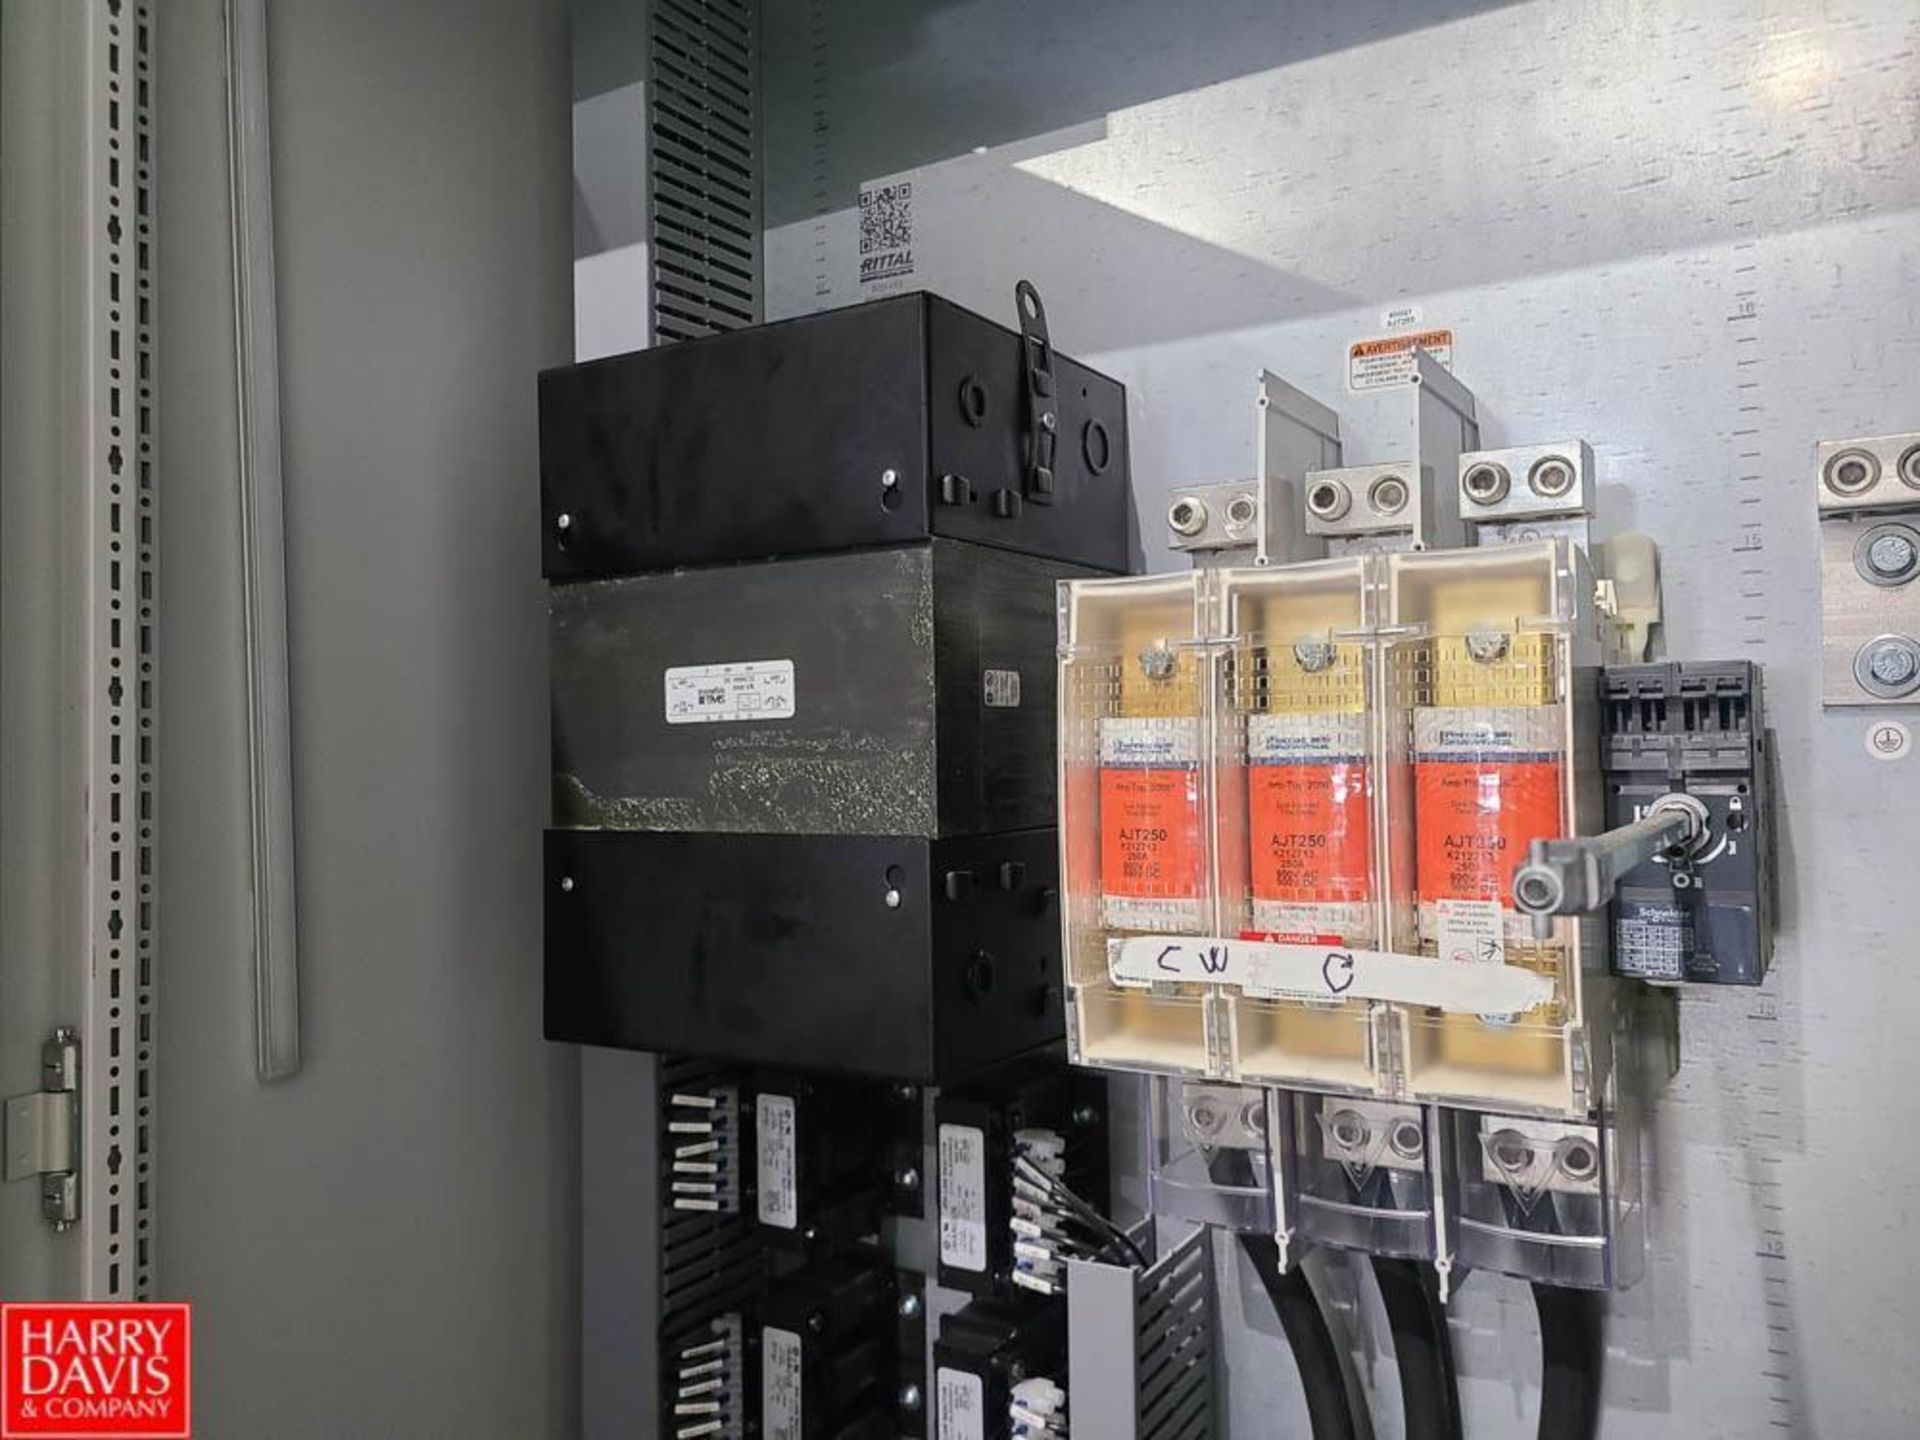 2021 Allen-Bradley PLC Main Control Panel with (11) Variable-Frequency Drives, Brakers, Transformers - Image 10 of 11